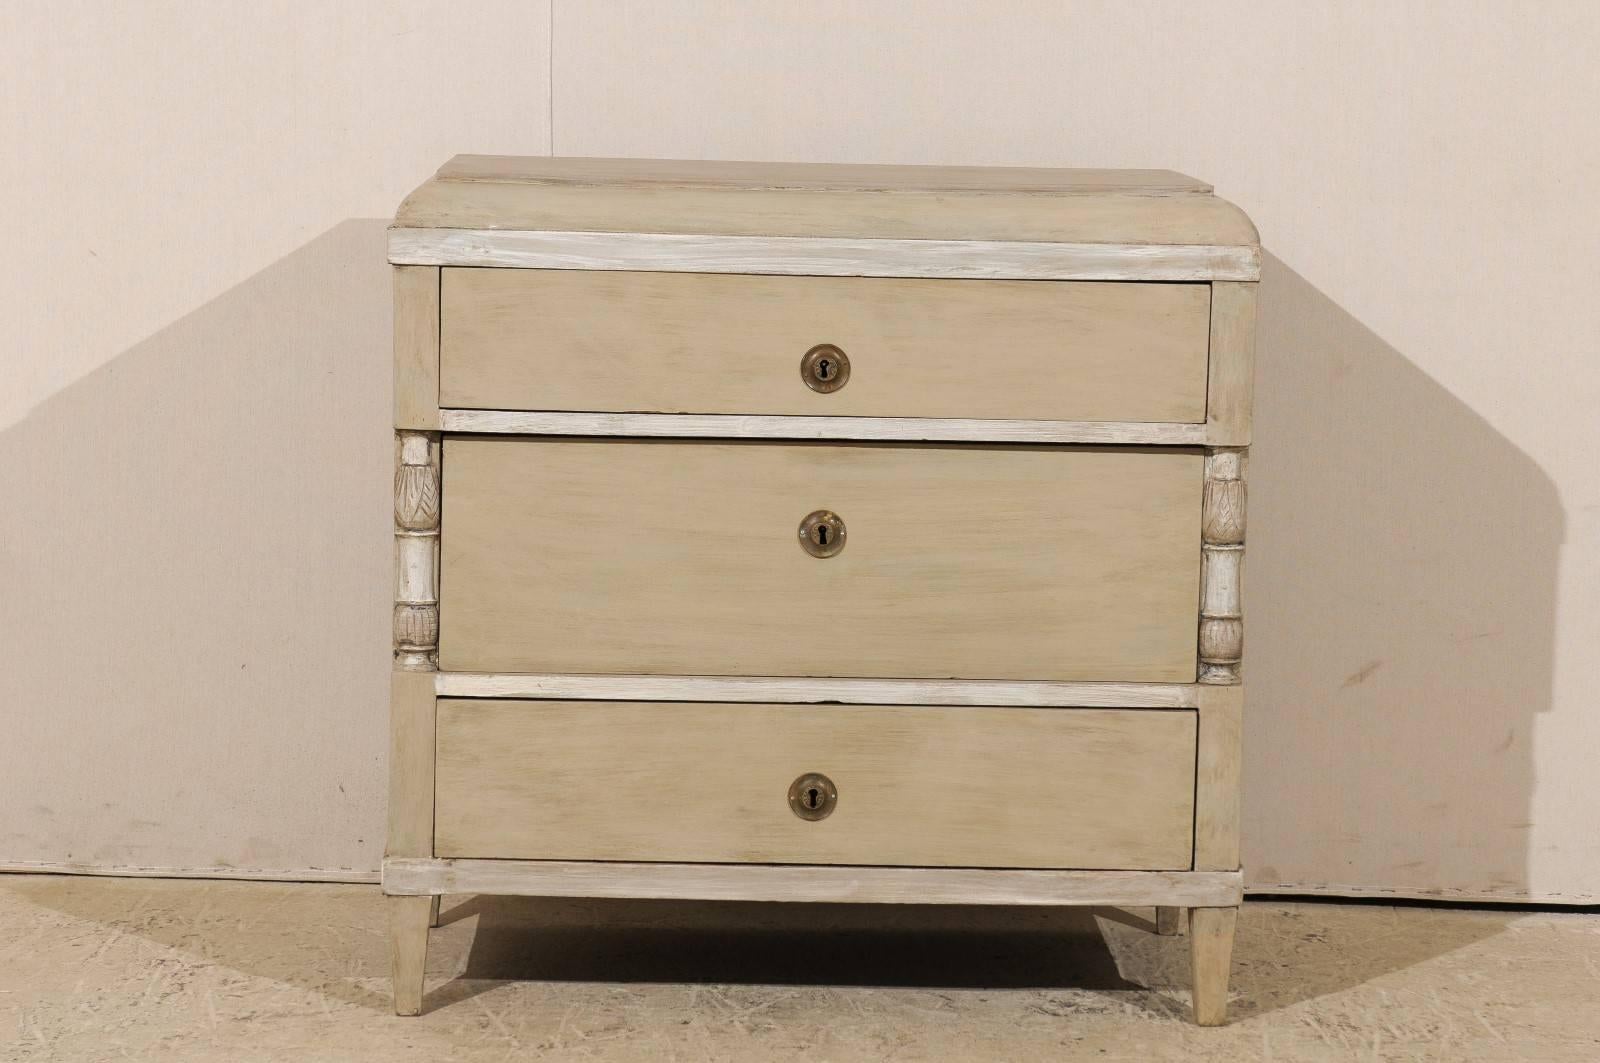 A Swedish mid-19th century chest with nicely dovetailed drawers. This Swedish painted wood three-drawer chest has a slightly raised top with gentle sloping out and down towards the main body which features a recessed middle drawer. The simple rather